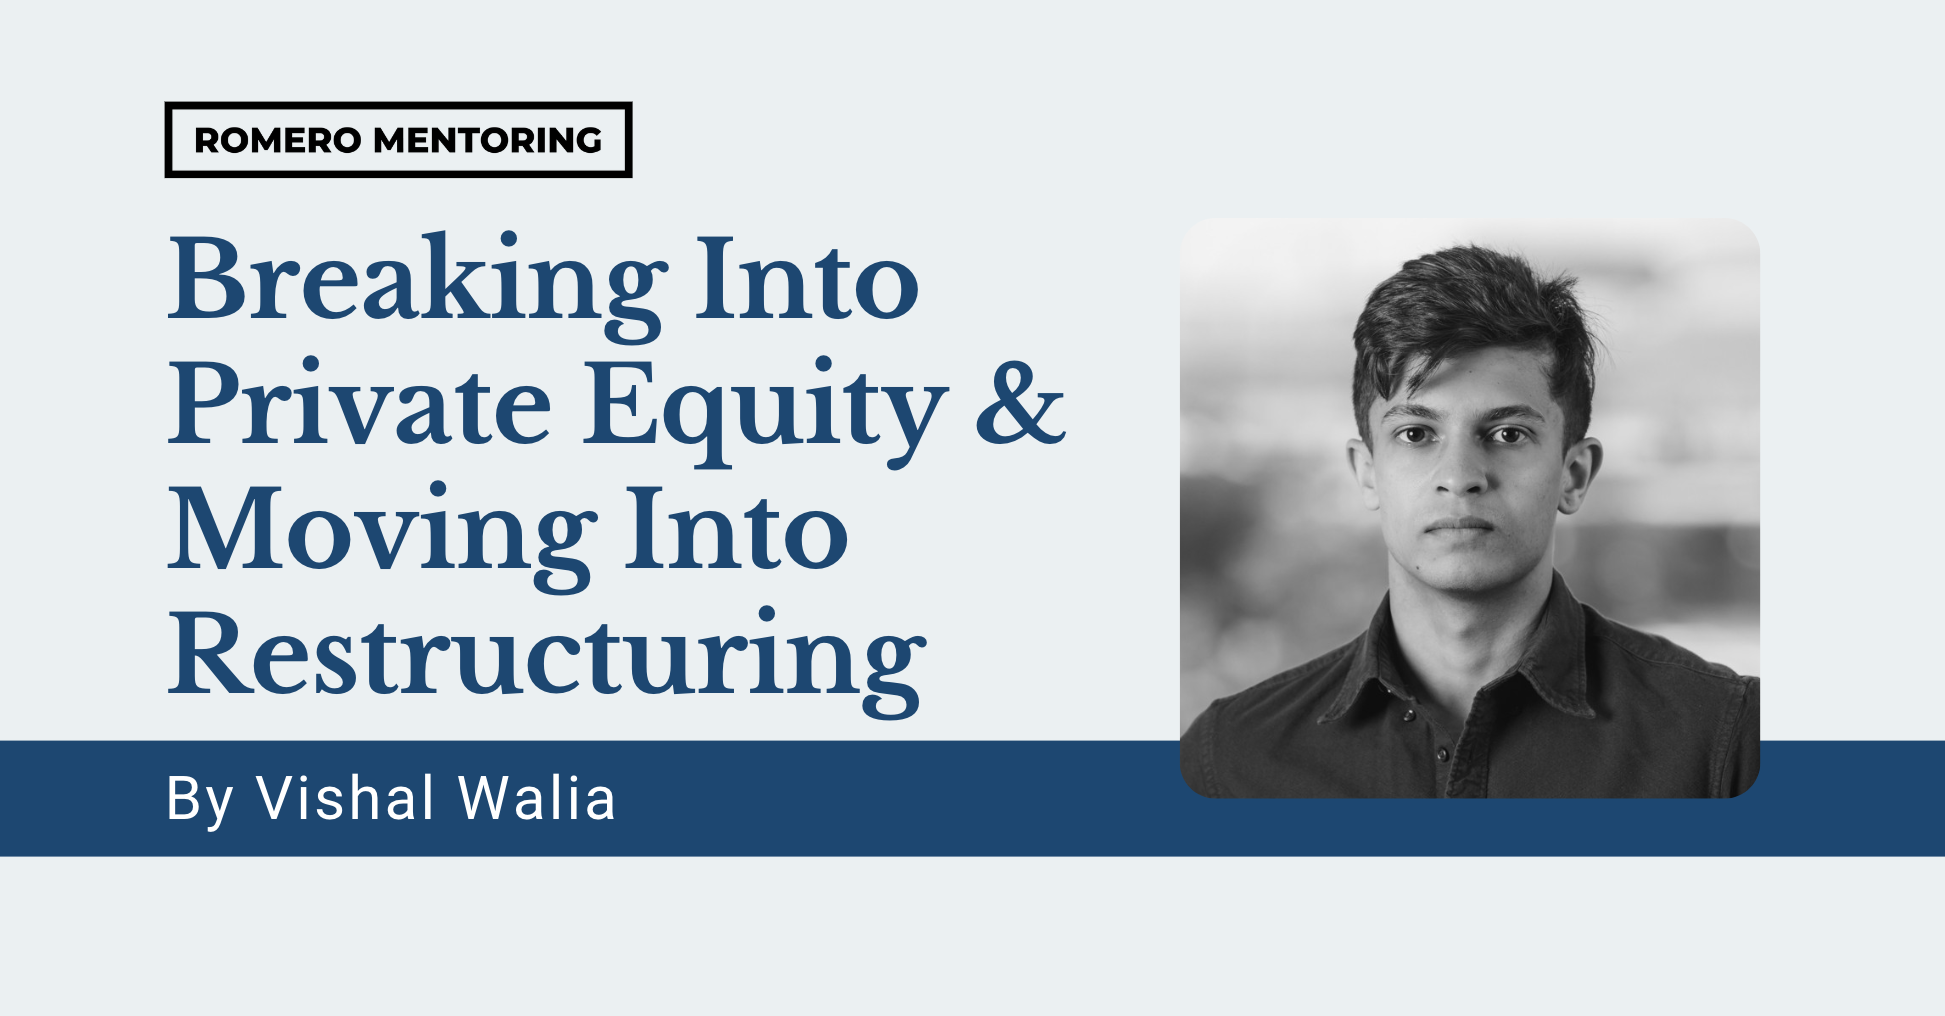 Breaking Into Private Equity & Moving Into Restructuring